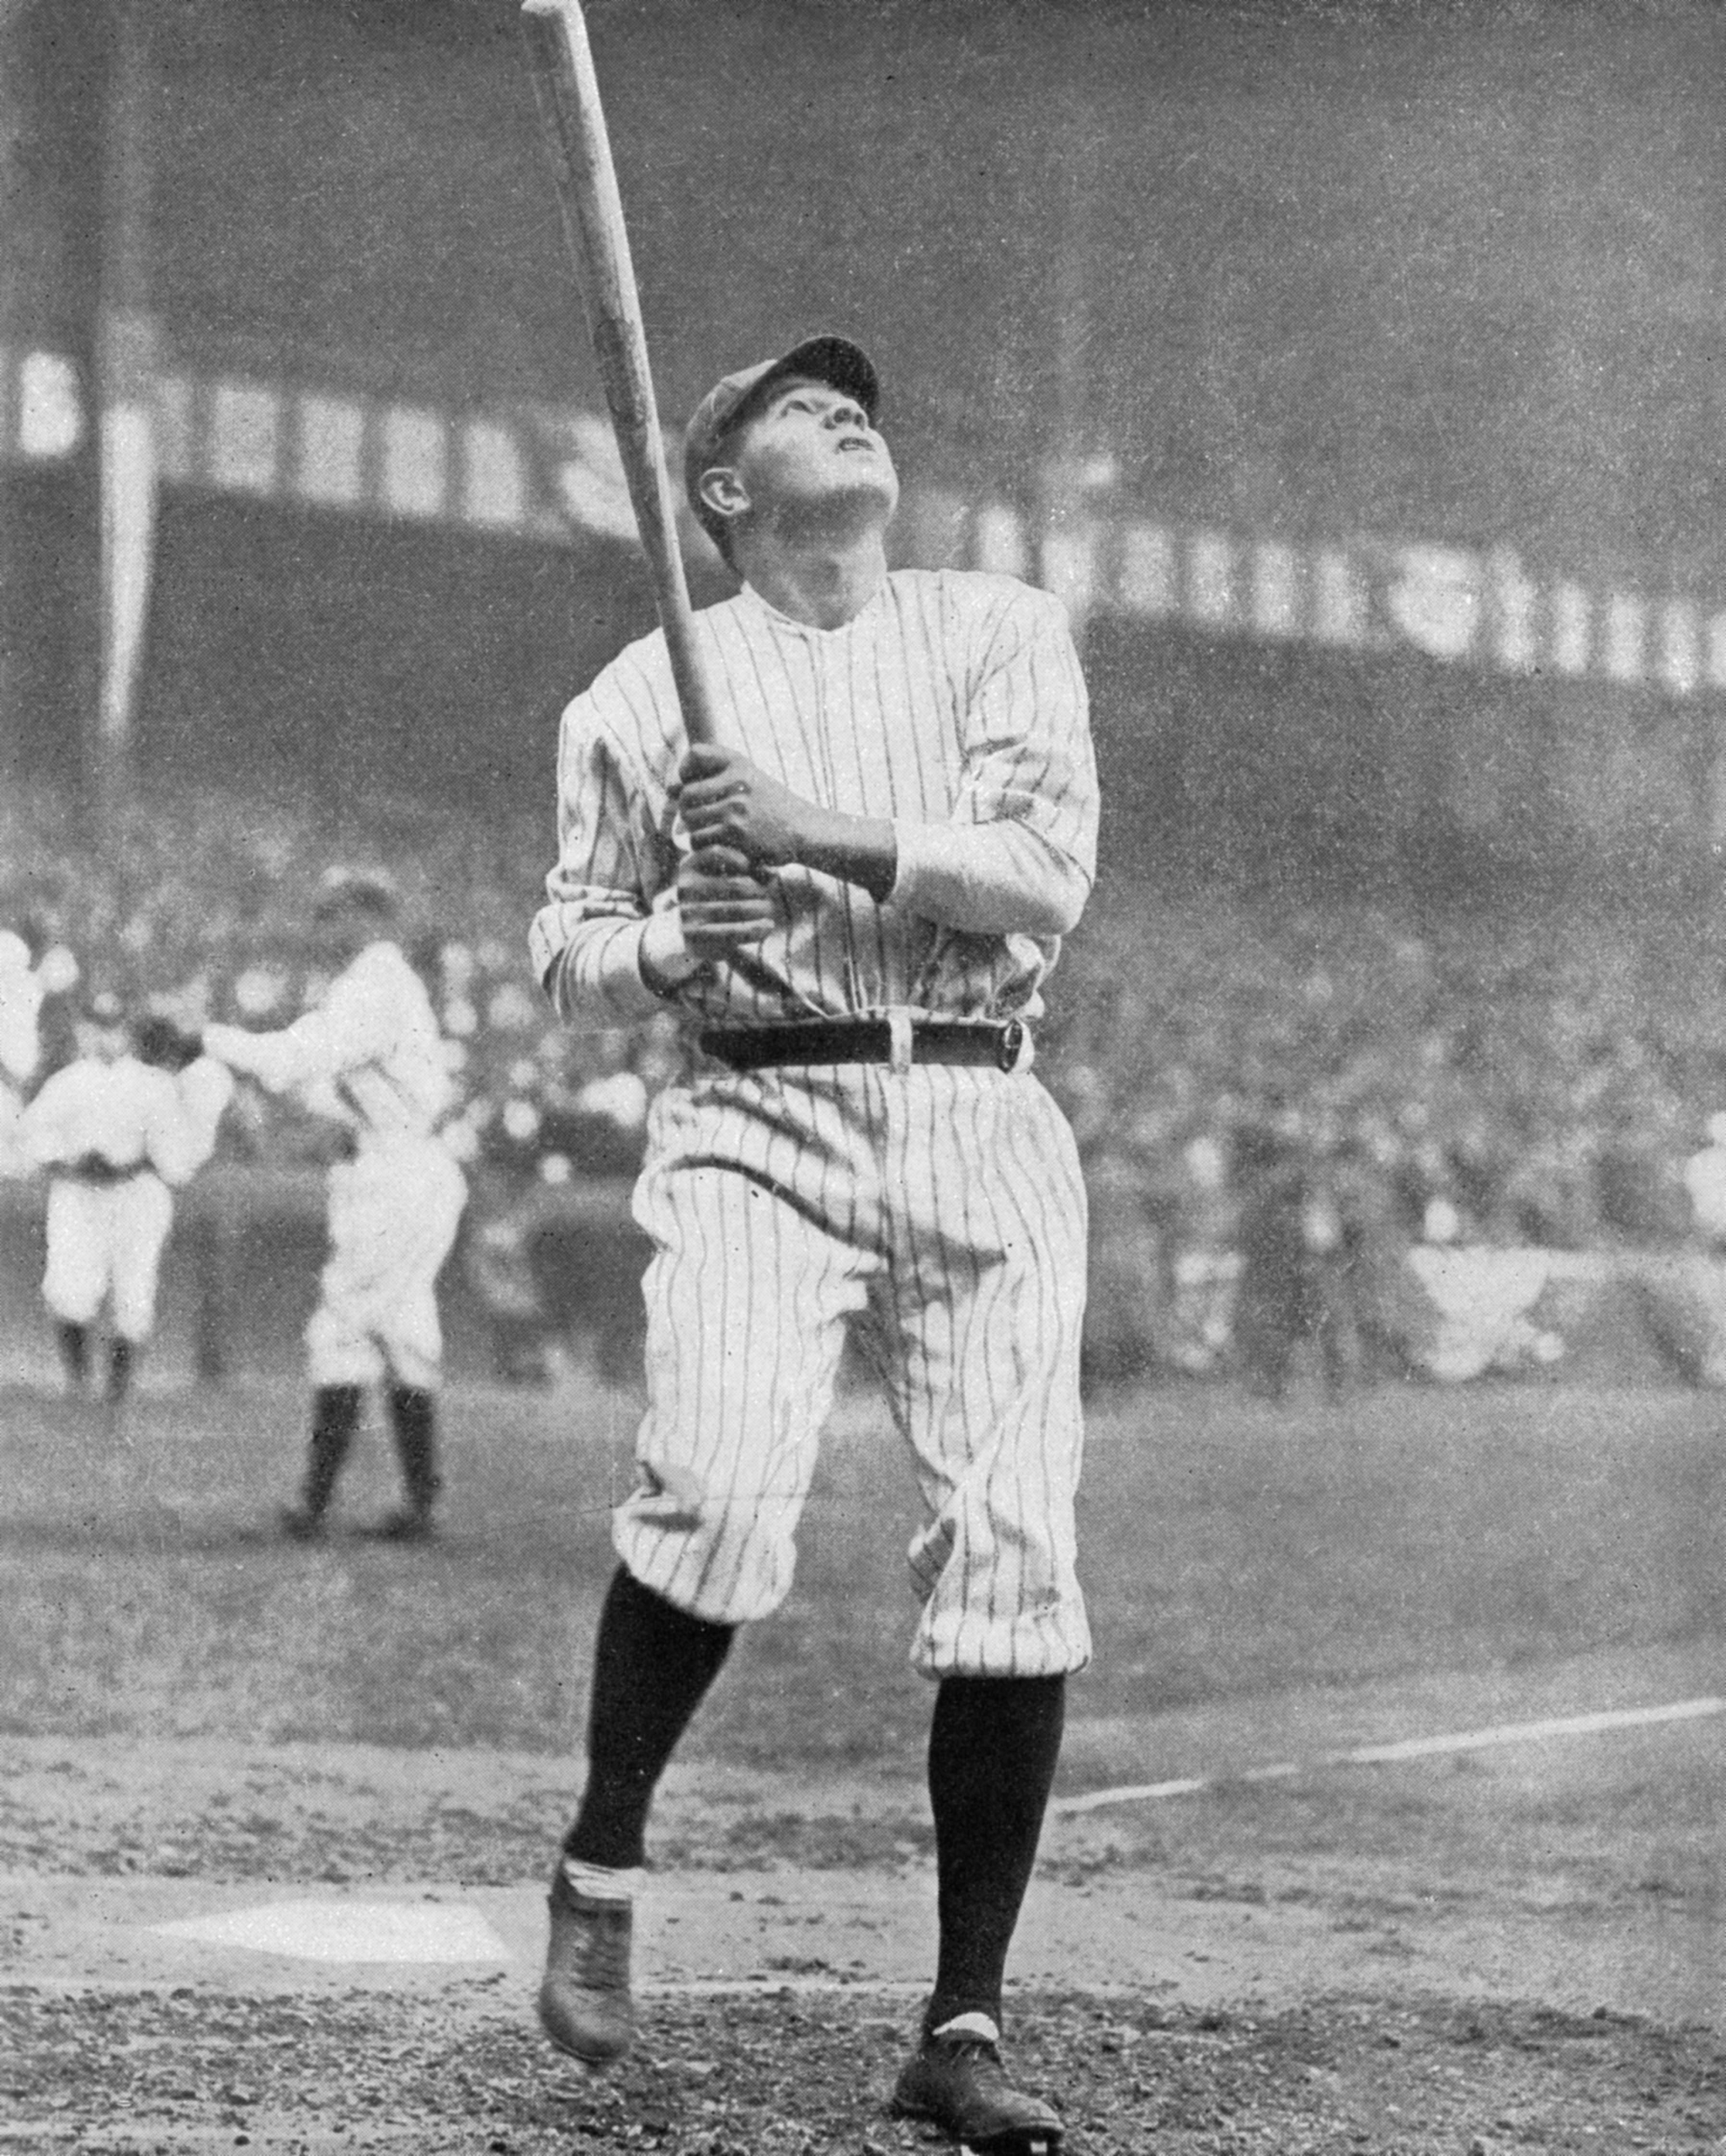 Babe Ruth swinging at the Polo Grounds in 1921 (SABR-RUCKER ARCHIVE)